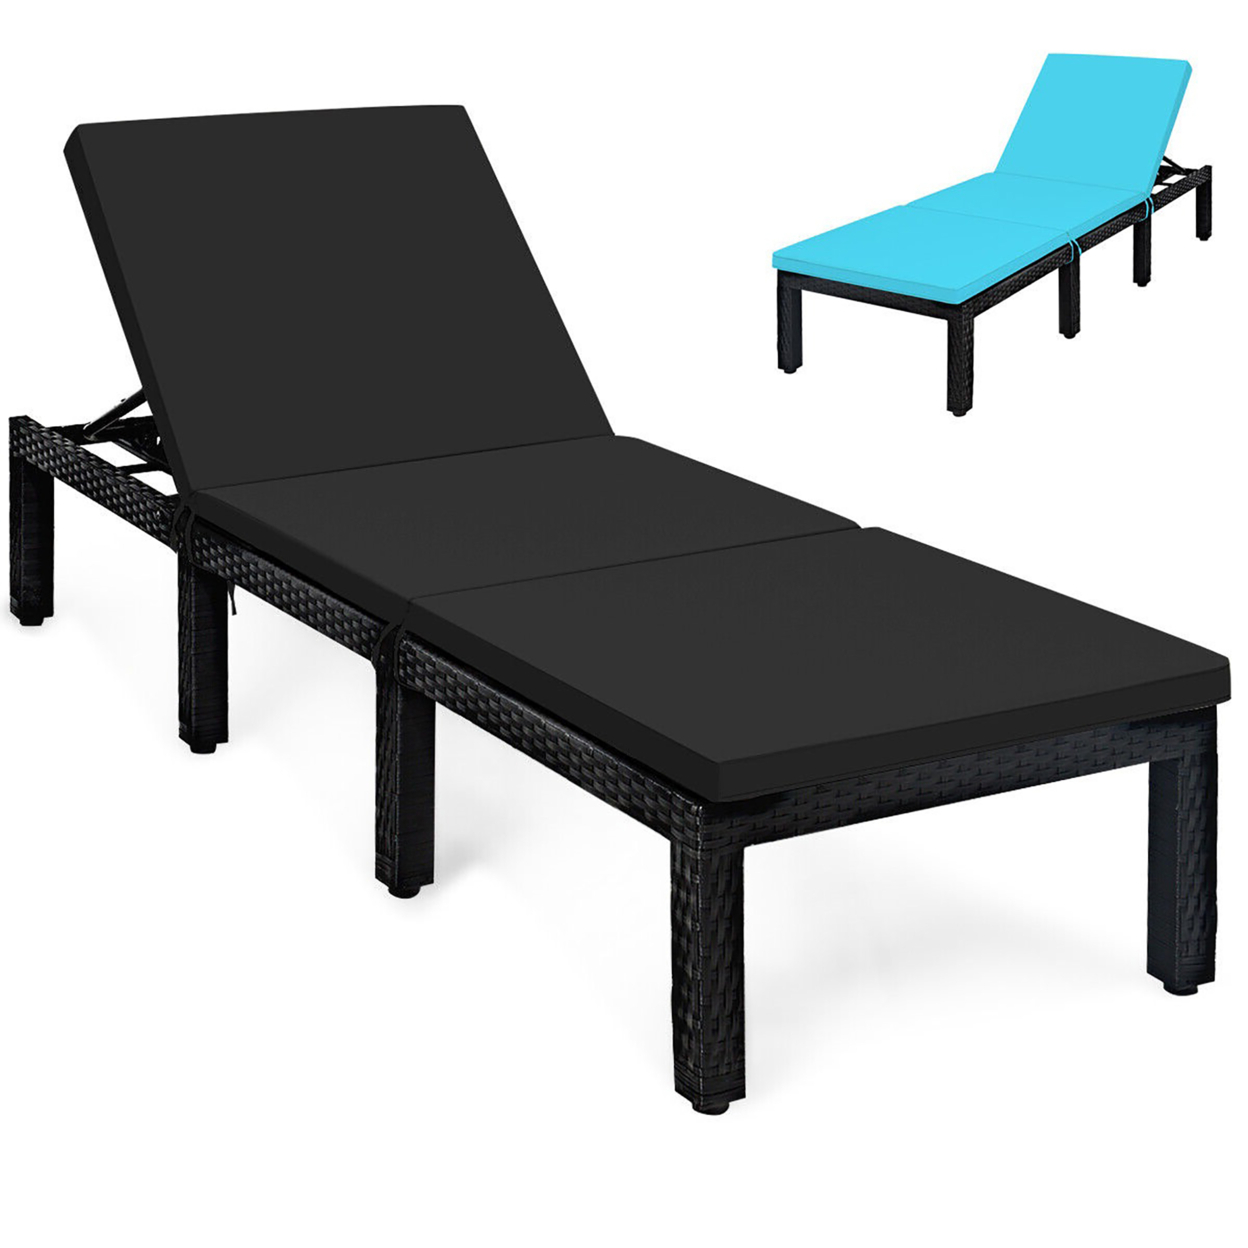 Adjustable Rattan Patio Chaise Lounge Chair Couch W/ Black & Turquoise Cushion